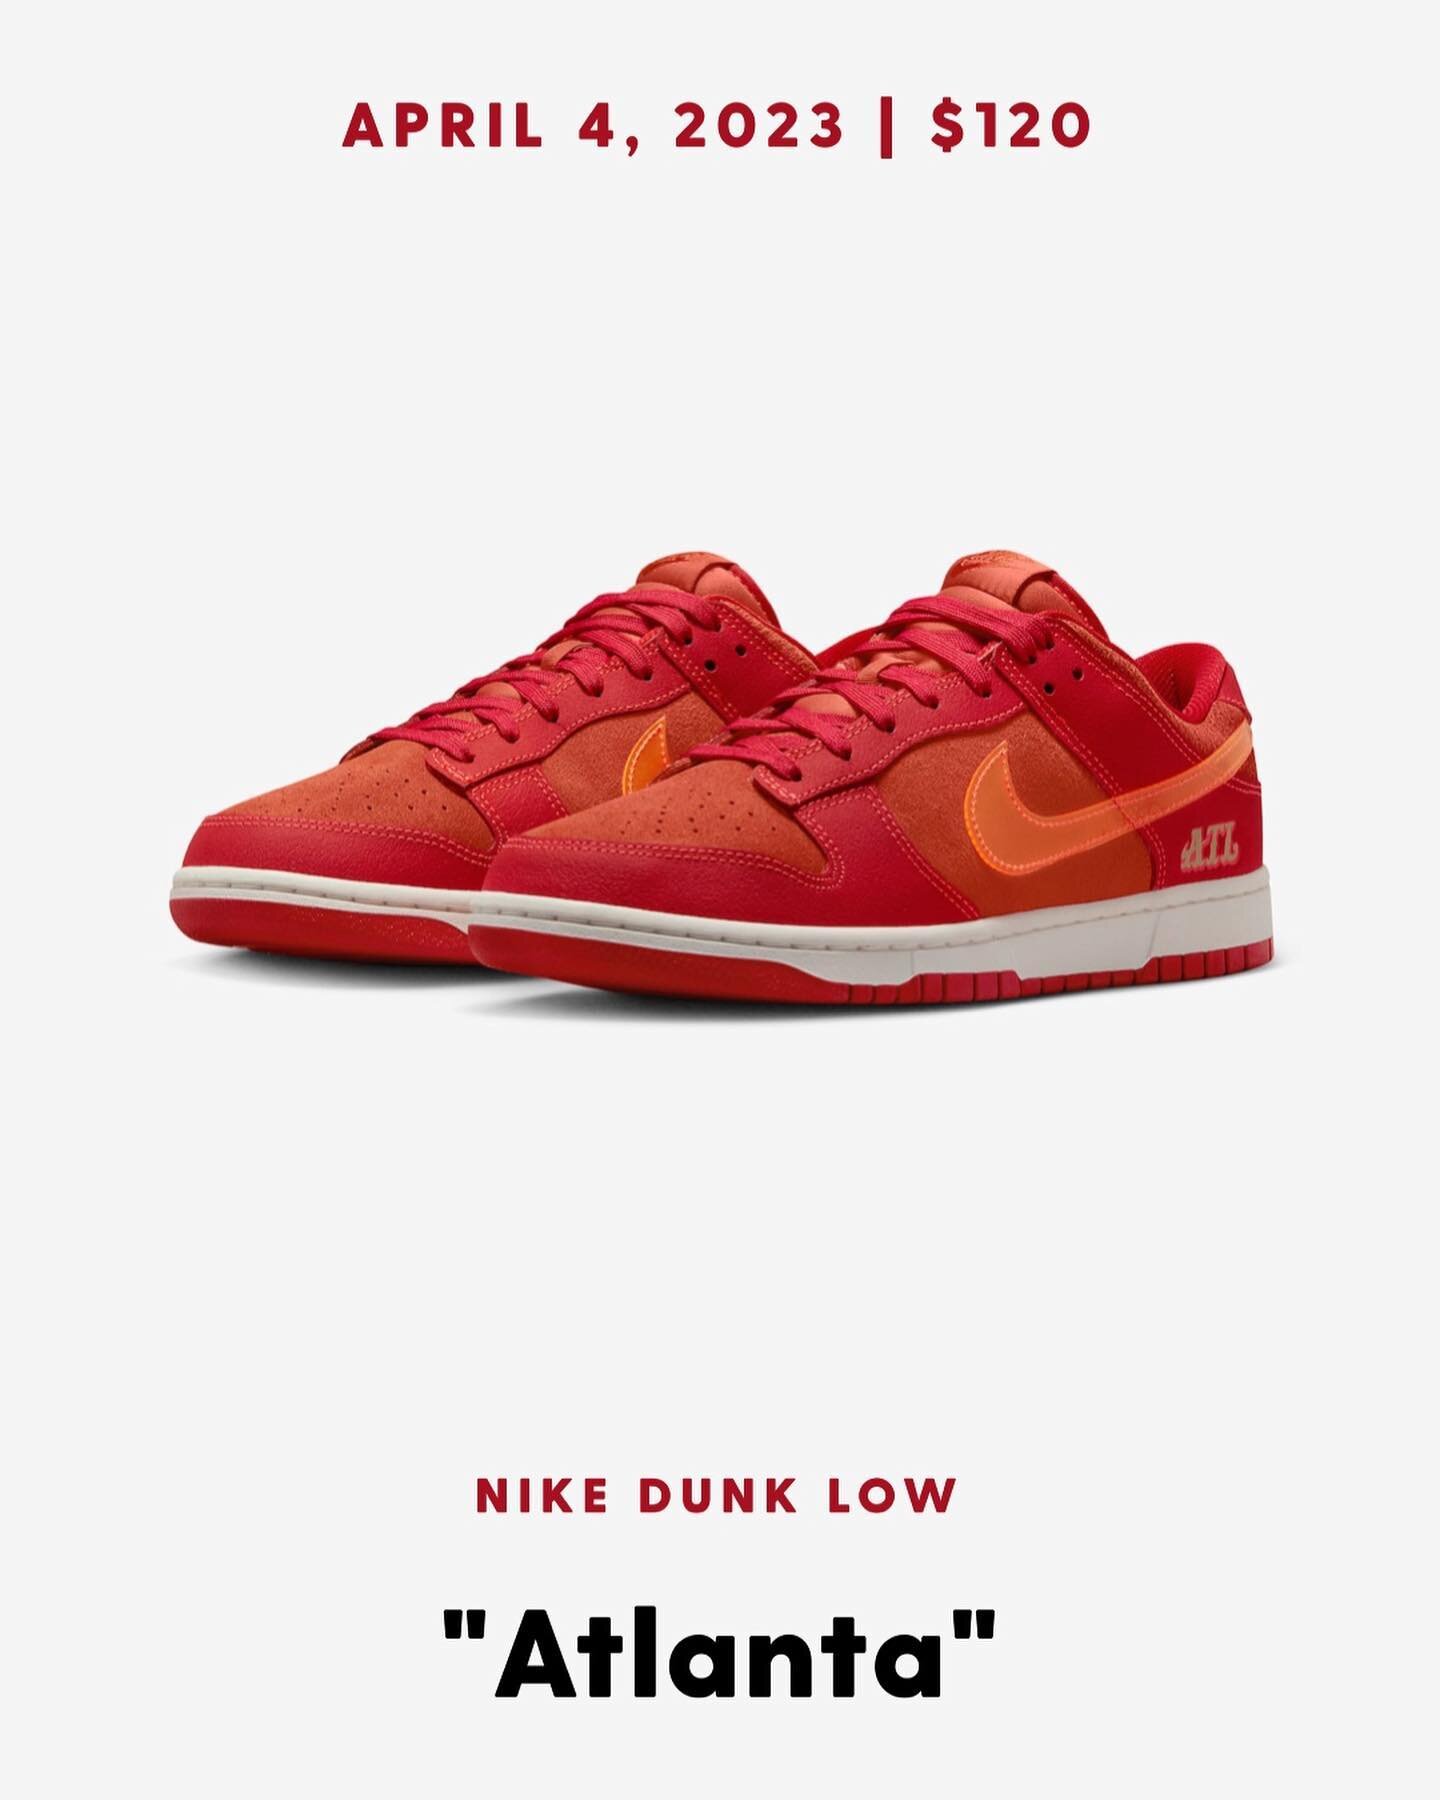 &ldquo;Foreva I love Atlanta&rdquo; | Expect the Nike Dunk Low &ldquo;Atlanta&rdquo; to drop next week on the SNKRS app. (Link in bio for more details)